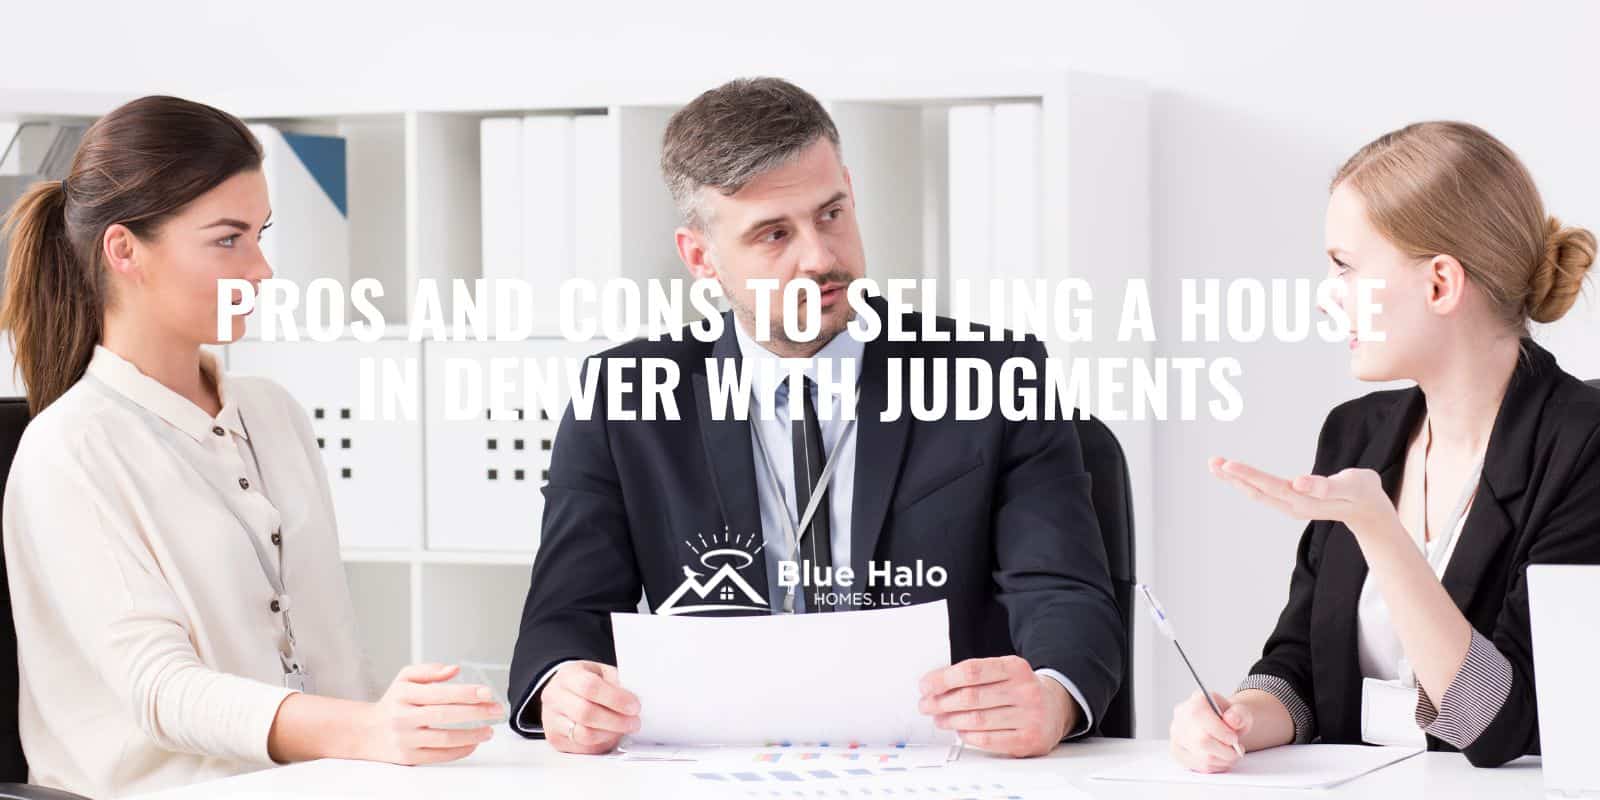 pros-and-cons-to-selling-a-house-in-denver-with-judgments-blue-halo-homes